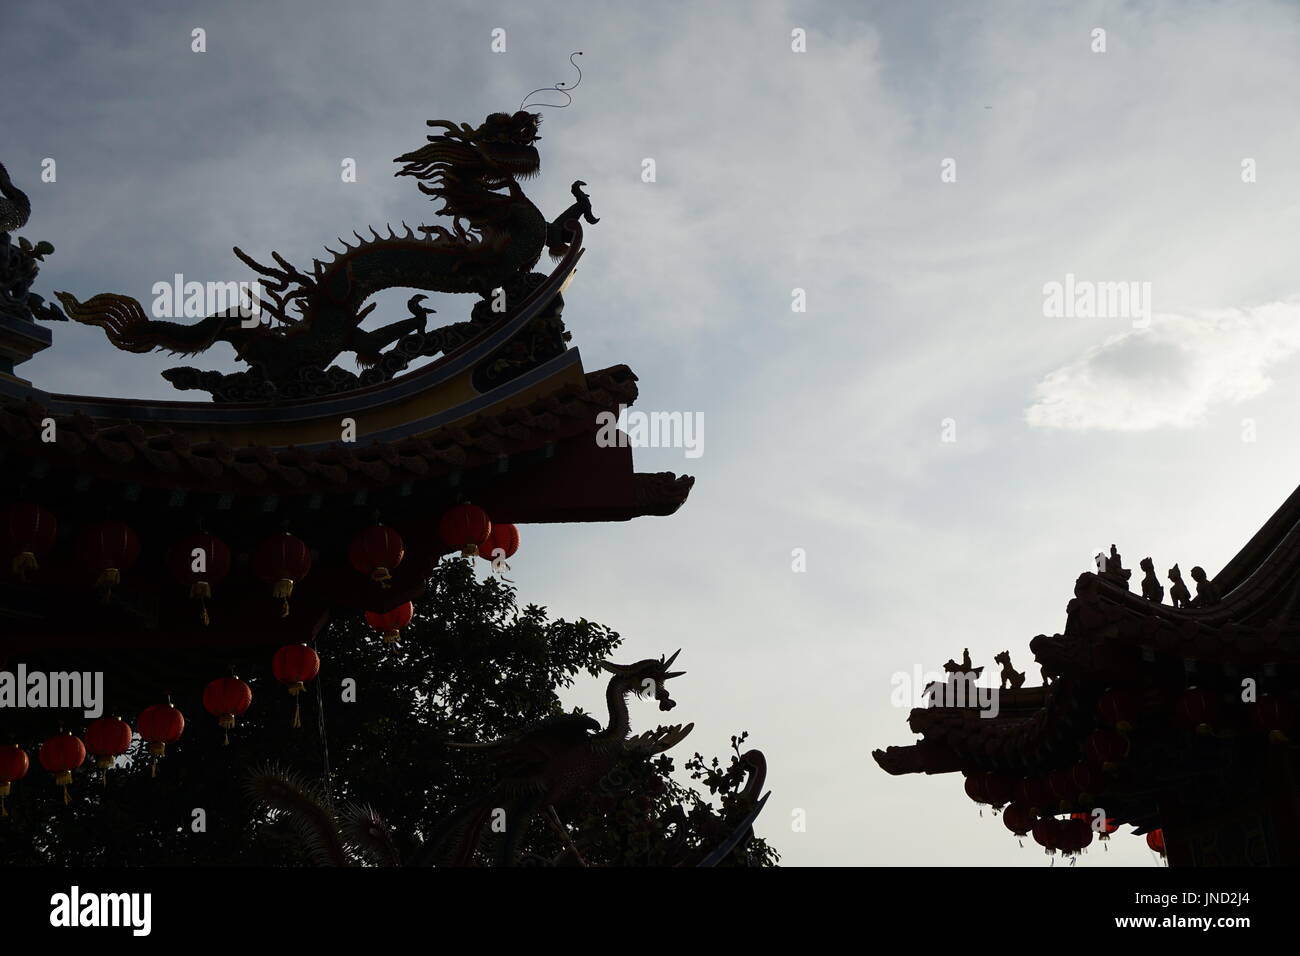 silhouette of dragon on temple roof Stock Photo